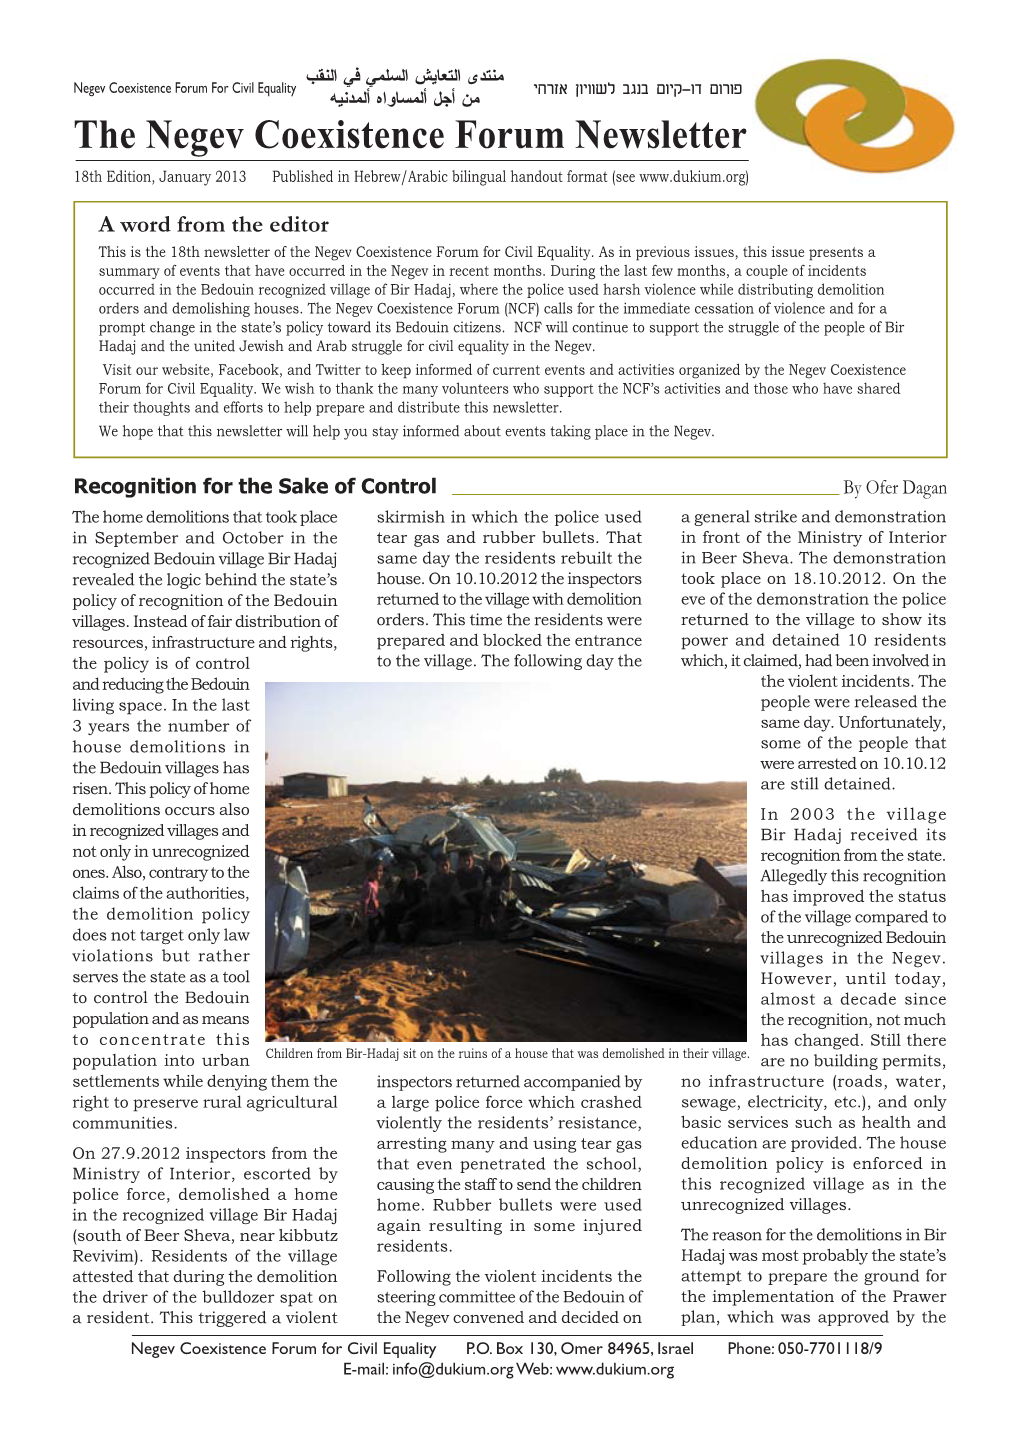 The Negev Coexistence Forum Newsletter 18Th Edition, January 2013 Published in Hebrew/Arabic Bilingual Handout Format (See